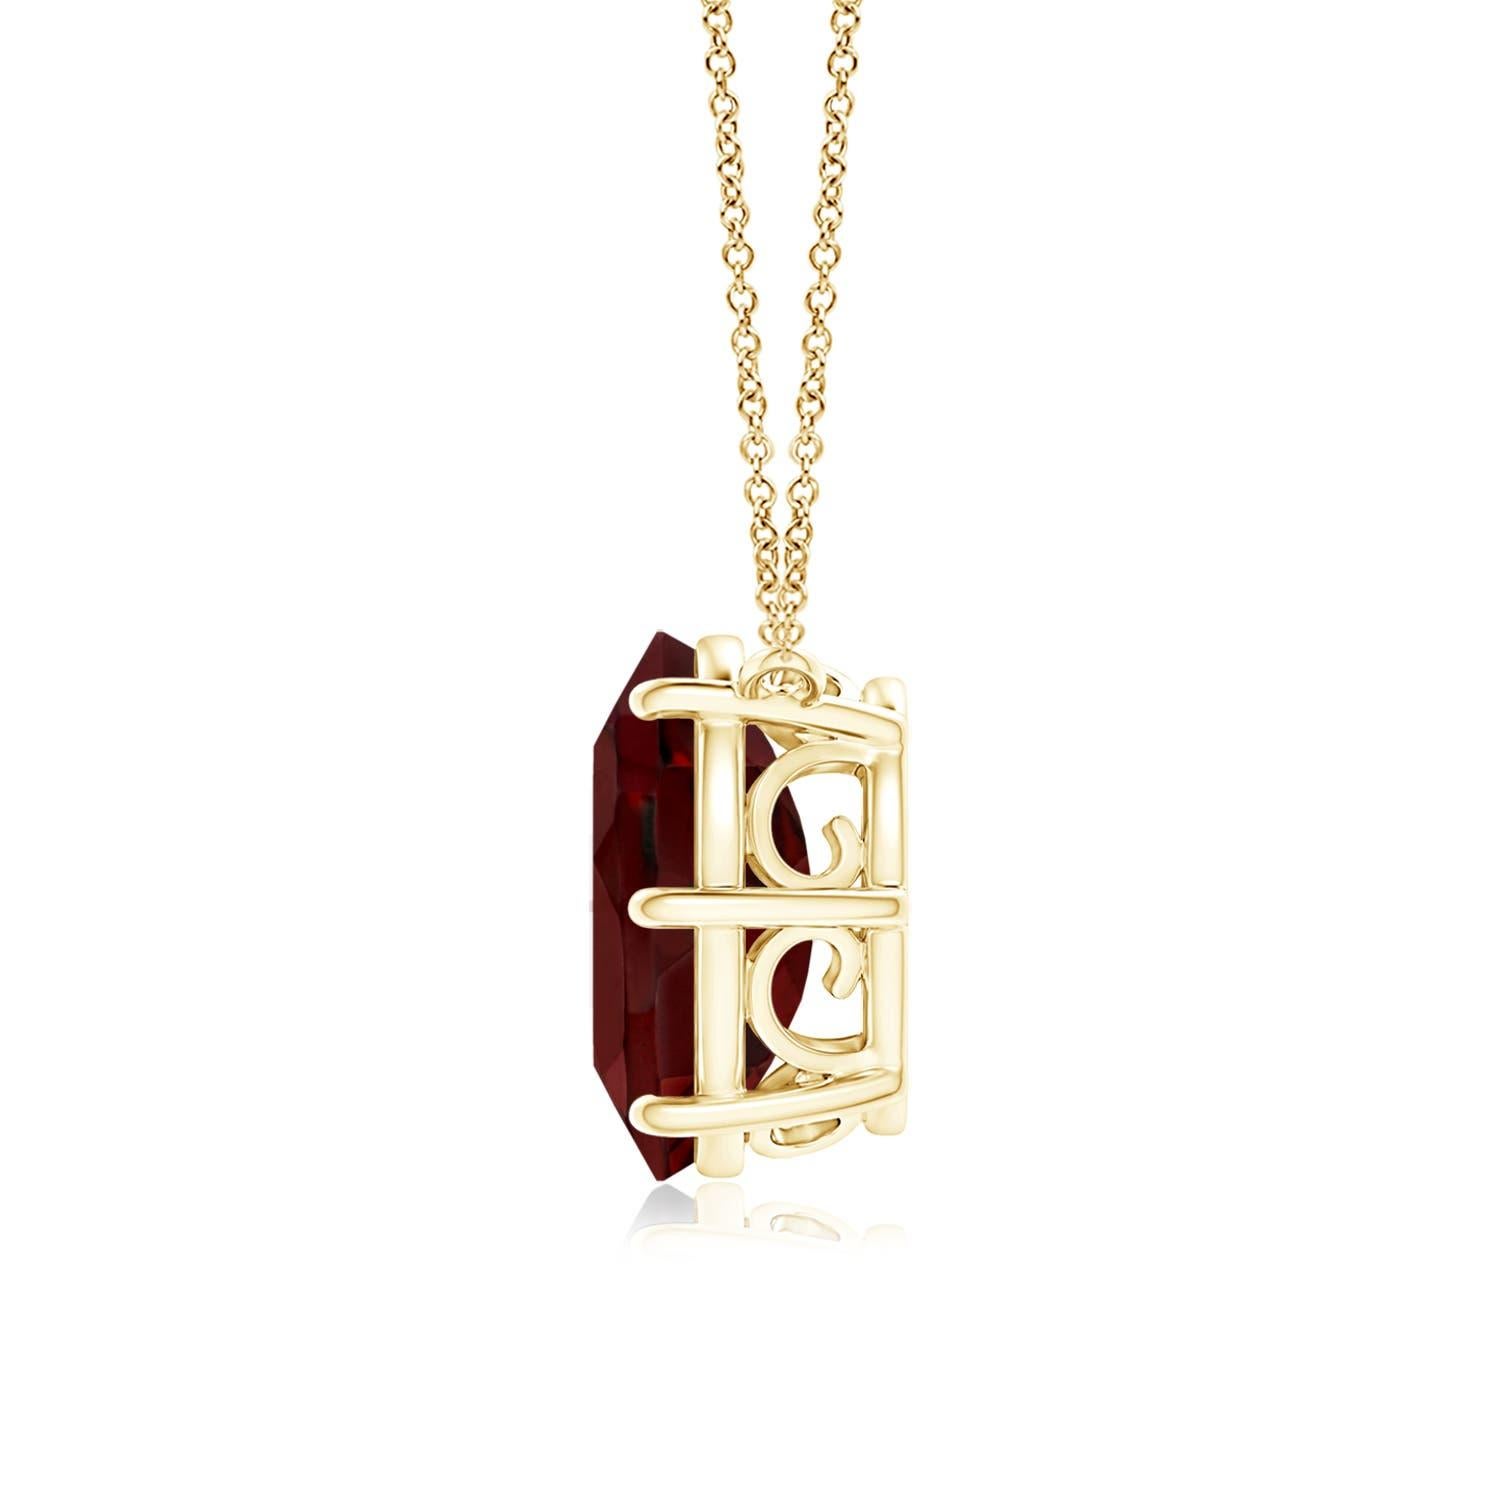 GIA Certified Oval Garnet Solitaire Pendant
